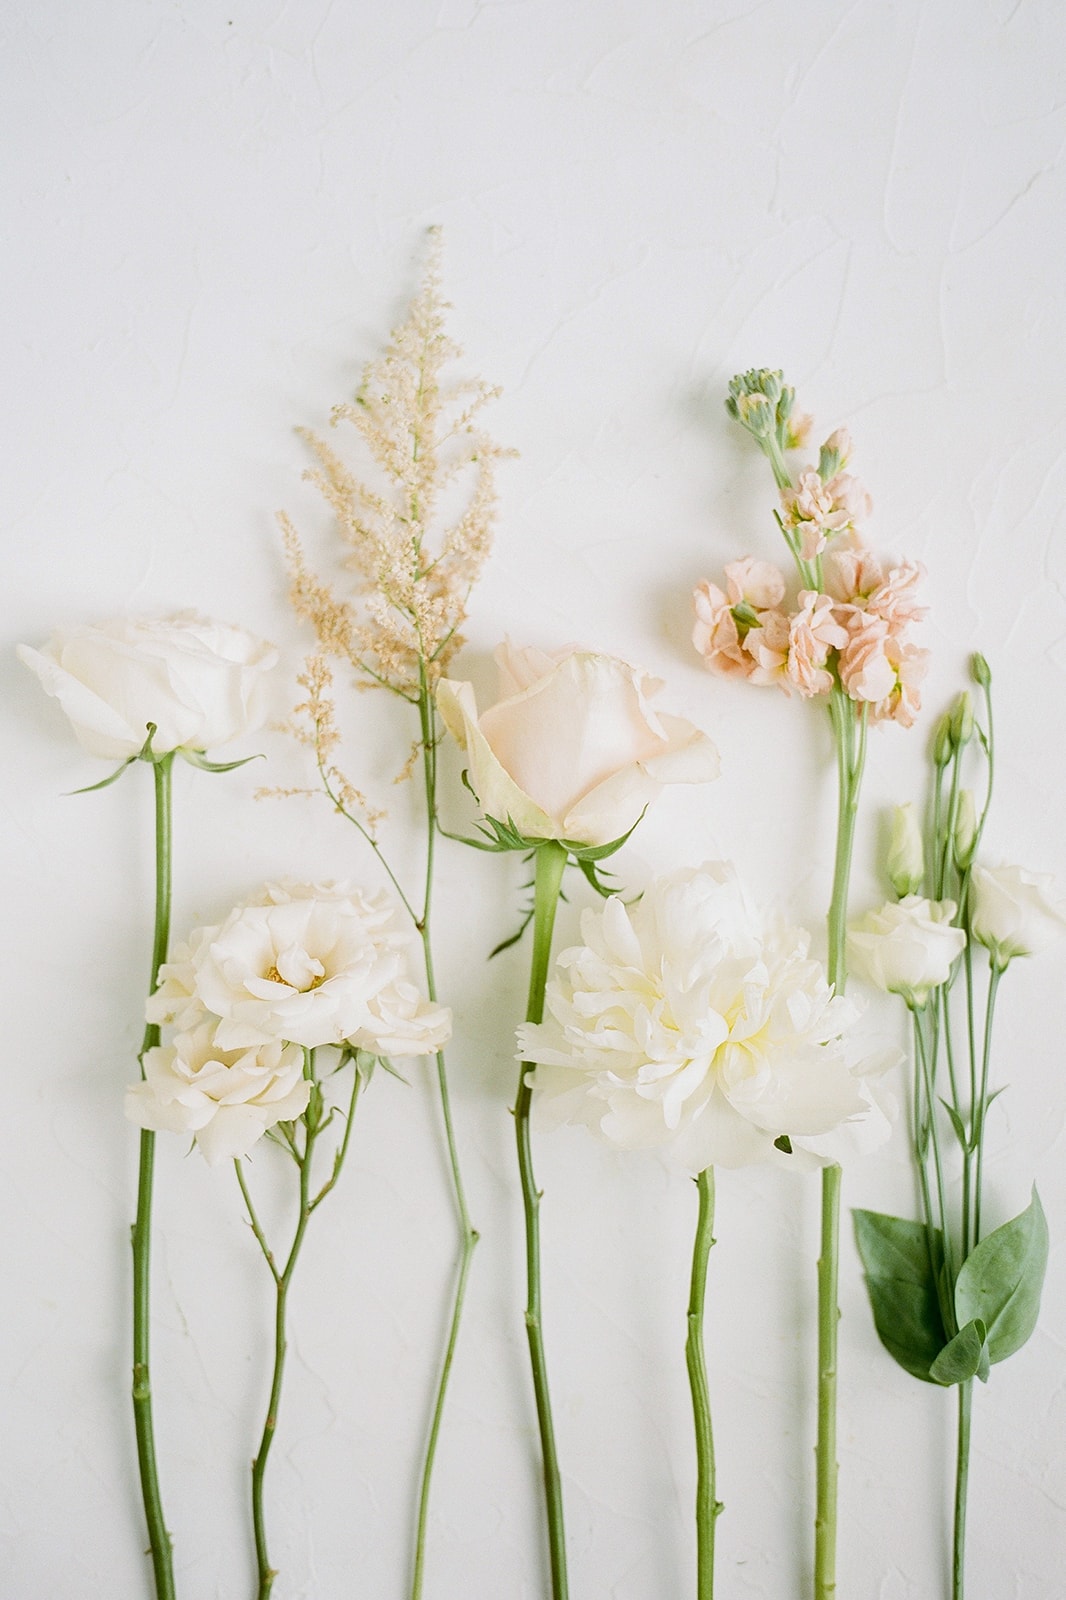 Wedding flowers: Why You Should Hire a Hybrid Photographer by Lauren Renee